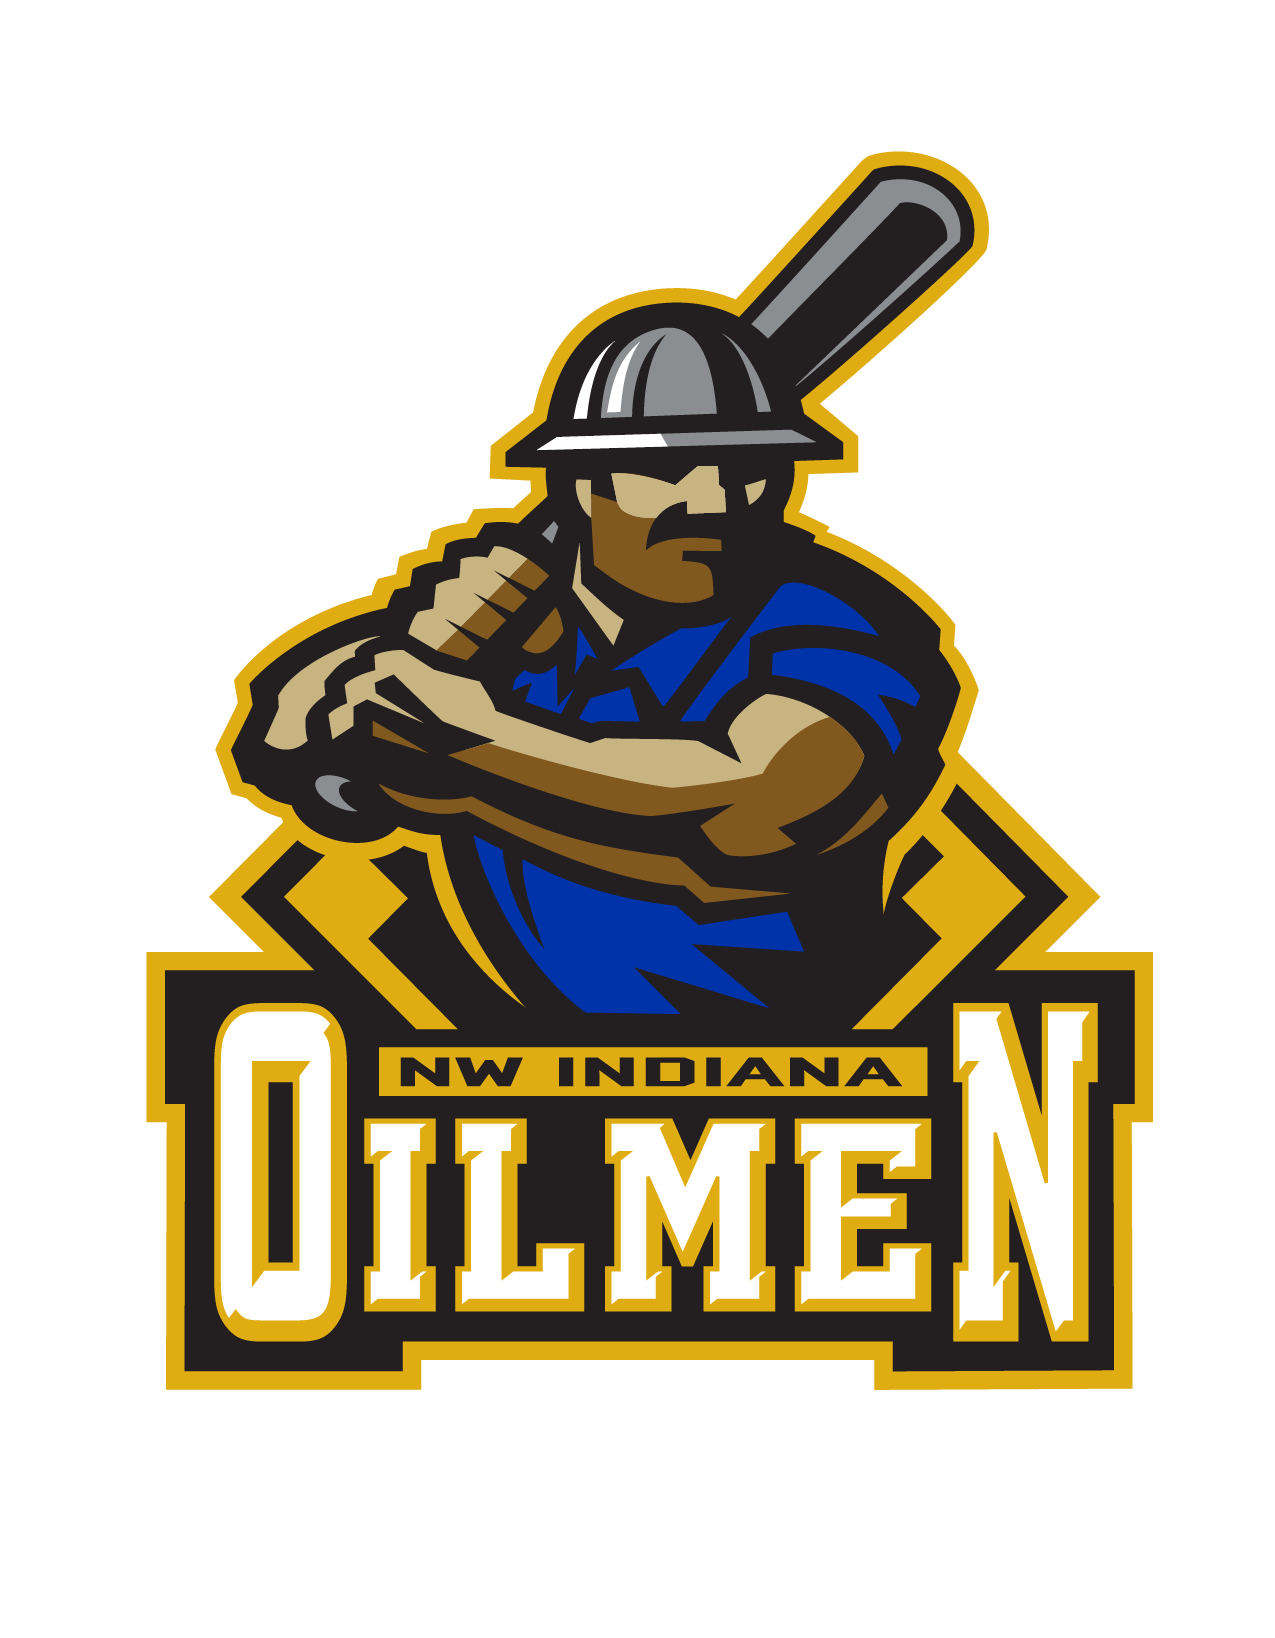 NWI OILMEN Primary [Converted]-01.png